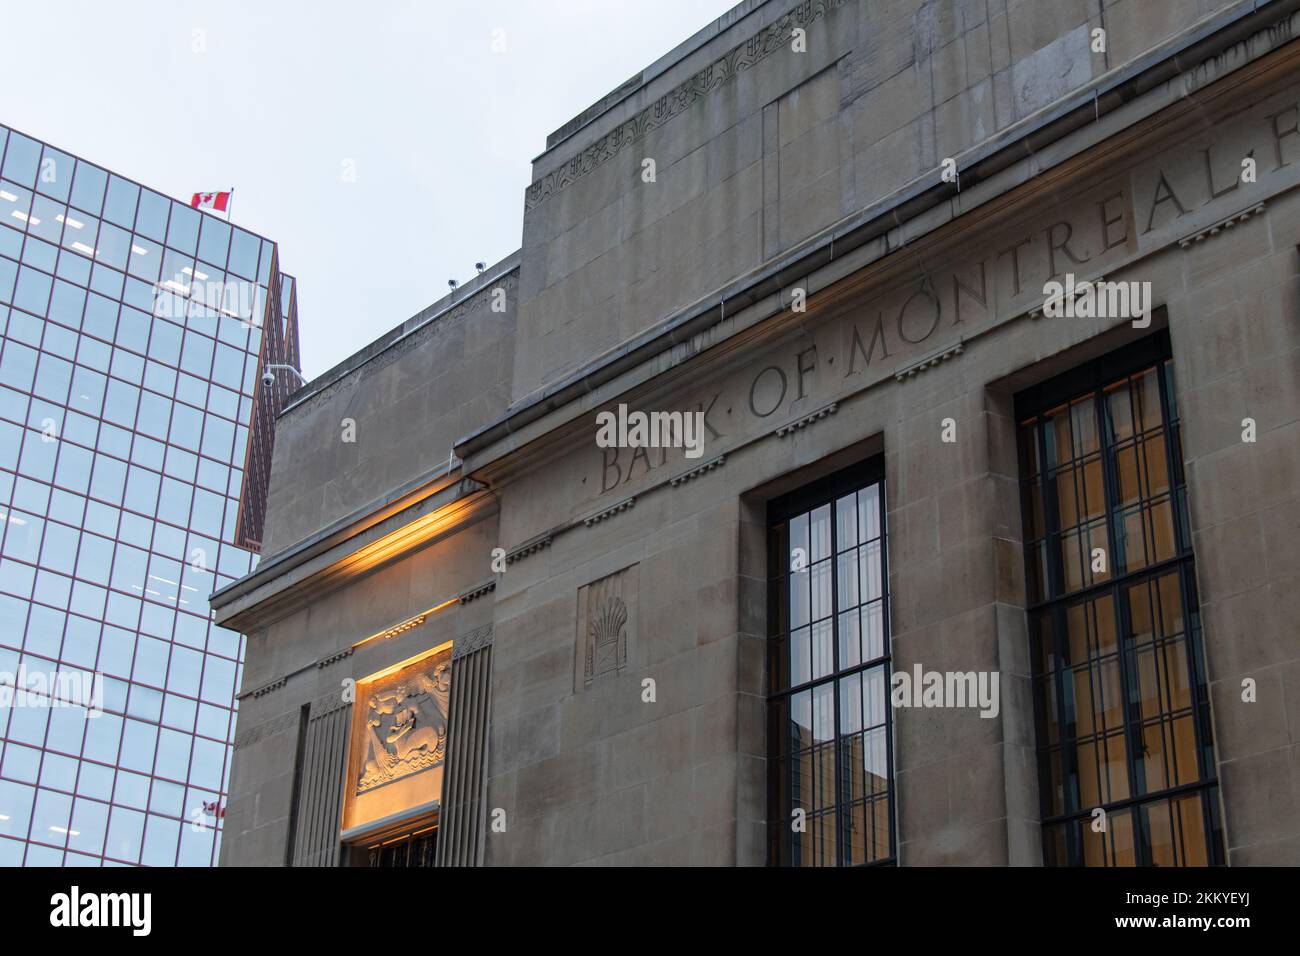 The Bank of Montreal text is seen engraved on the top of a building in downtown Ottawa. BMO is oldest bank in Canada founded in 1817 in Montreal. Stock Photo